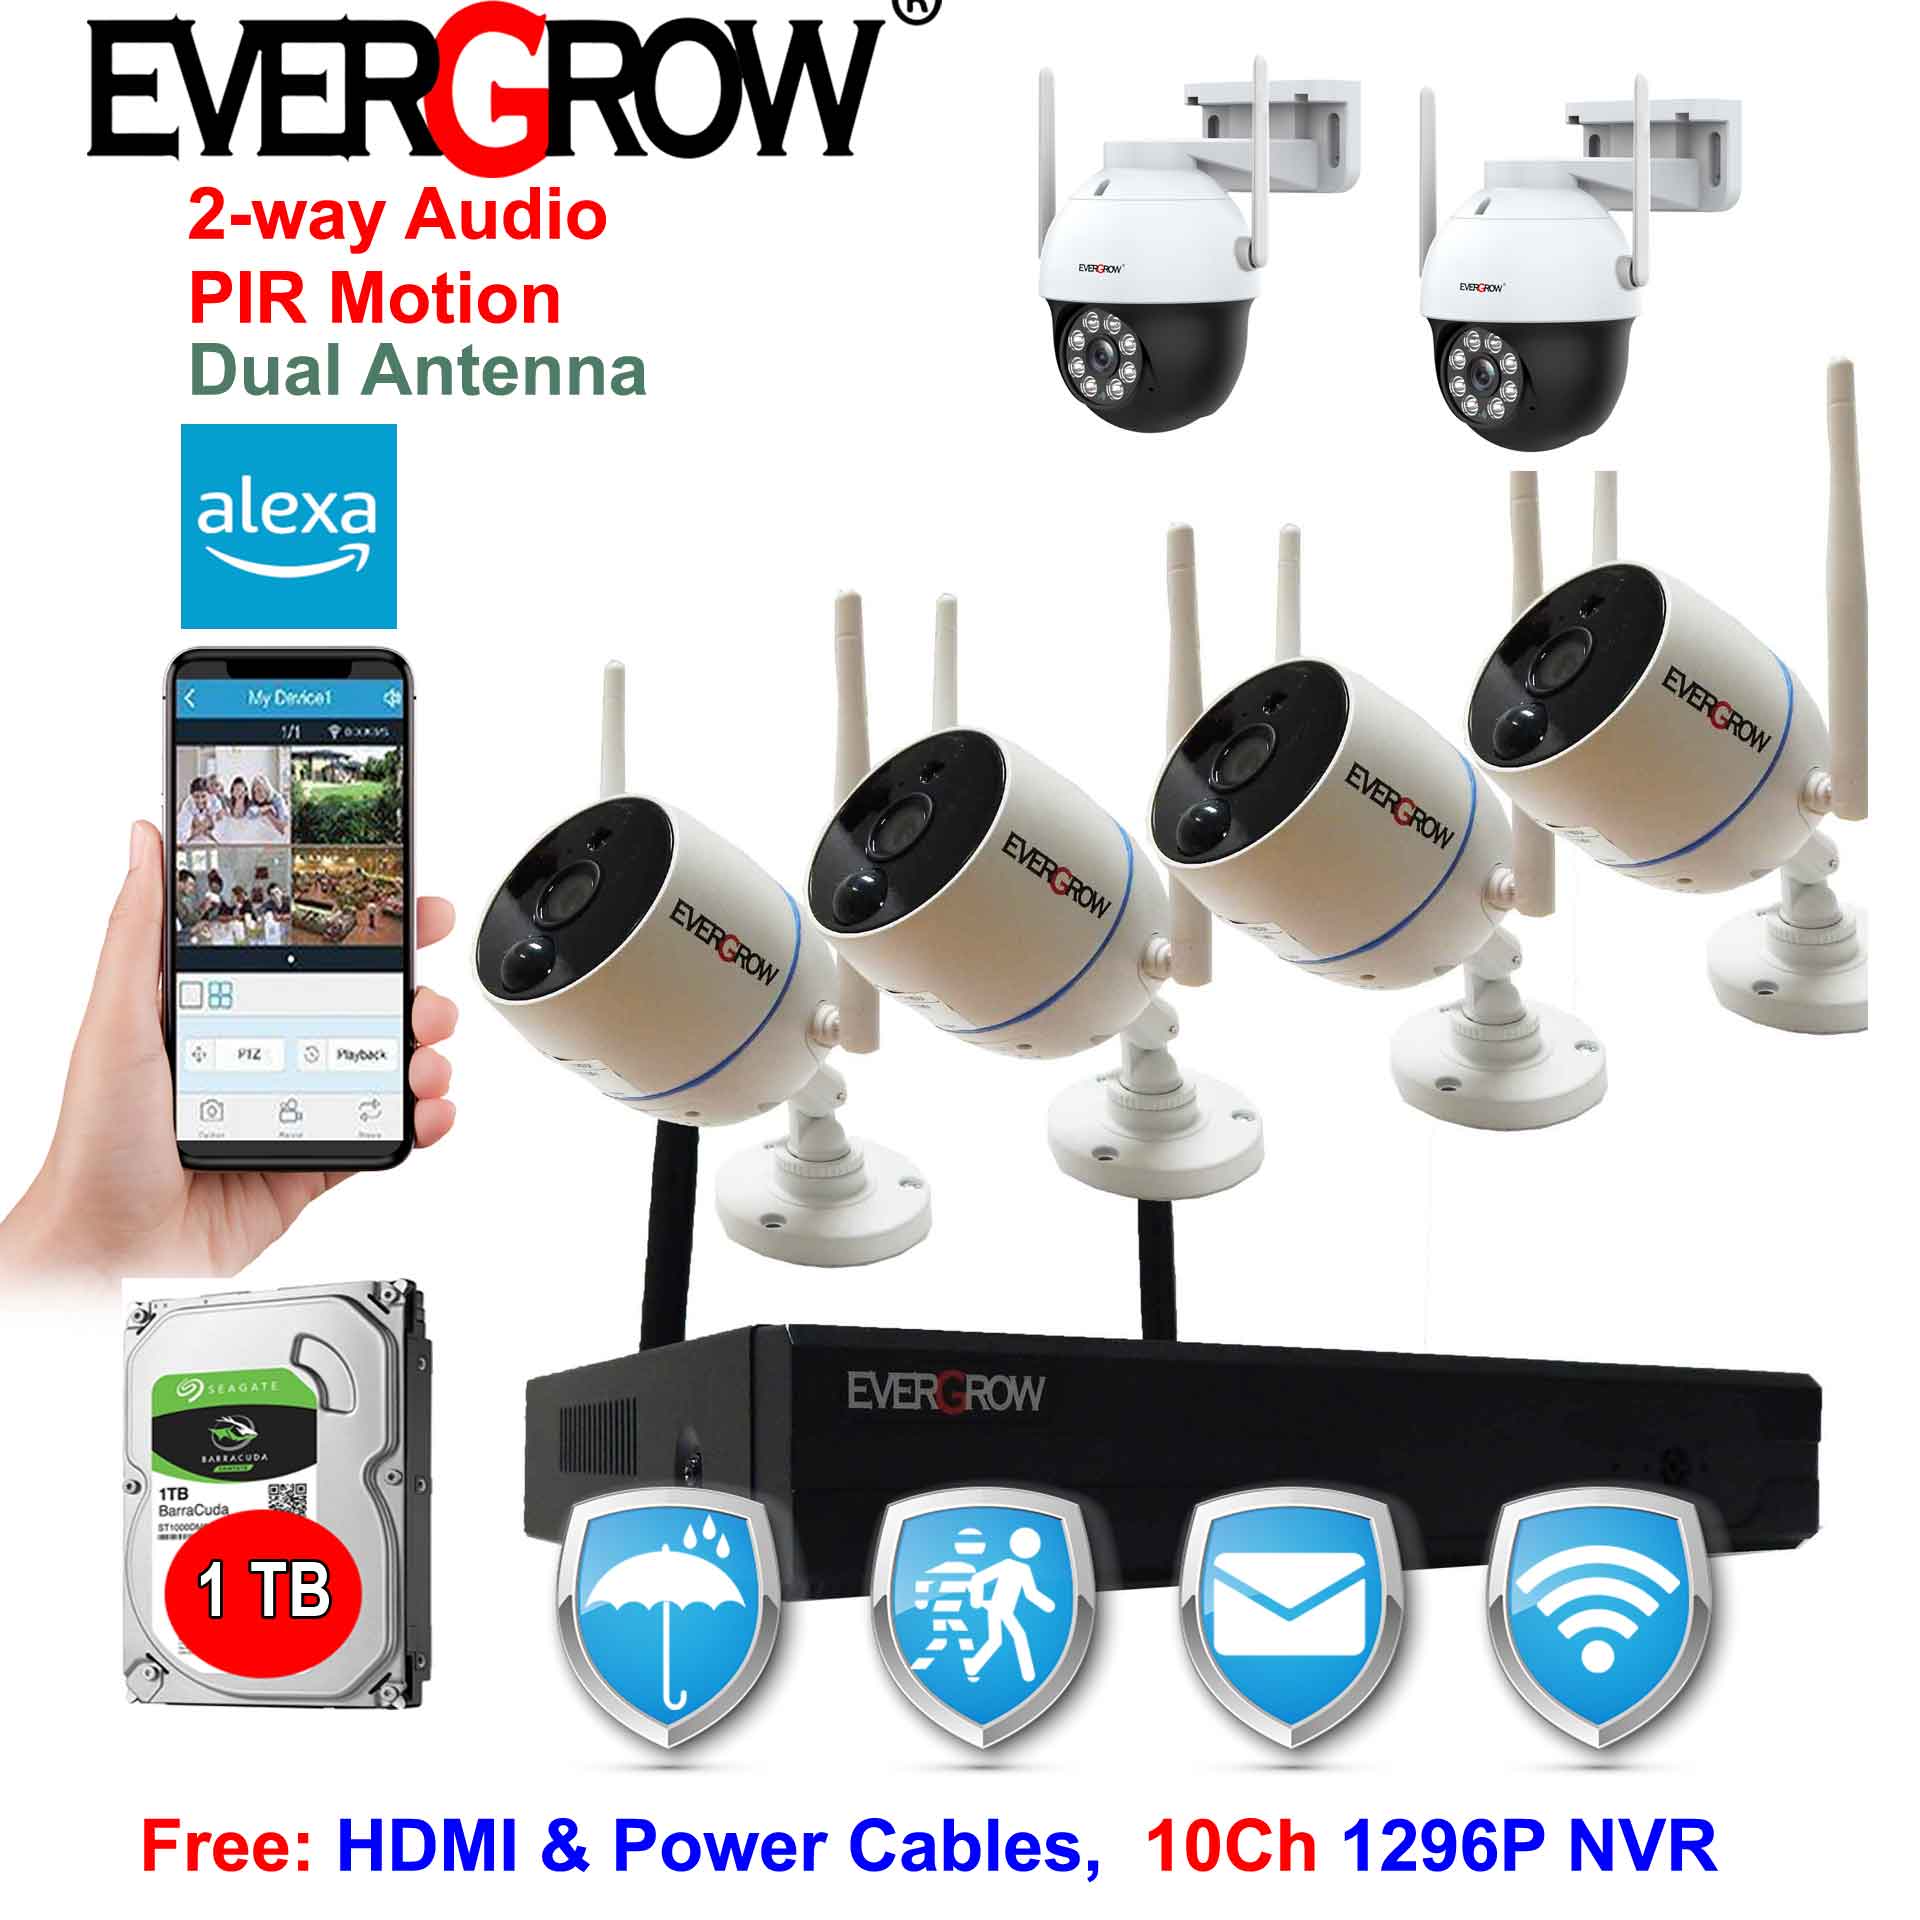 EverGrow Long Range Home Security Camera System 8CH 2K 3MP 1296P NVR and 4pcs of Wireless Wifi Camera + 2 PT Dome Cameras with 2 way audio Alexa (CAM-WIFI-4CH-2DOME-168) - image 1 of 8